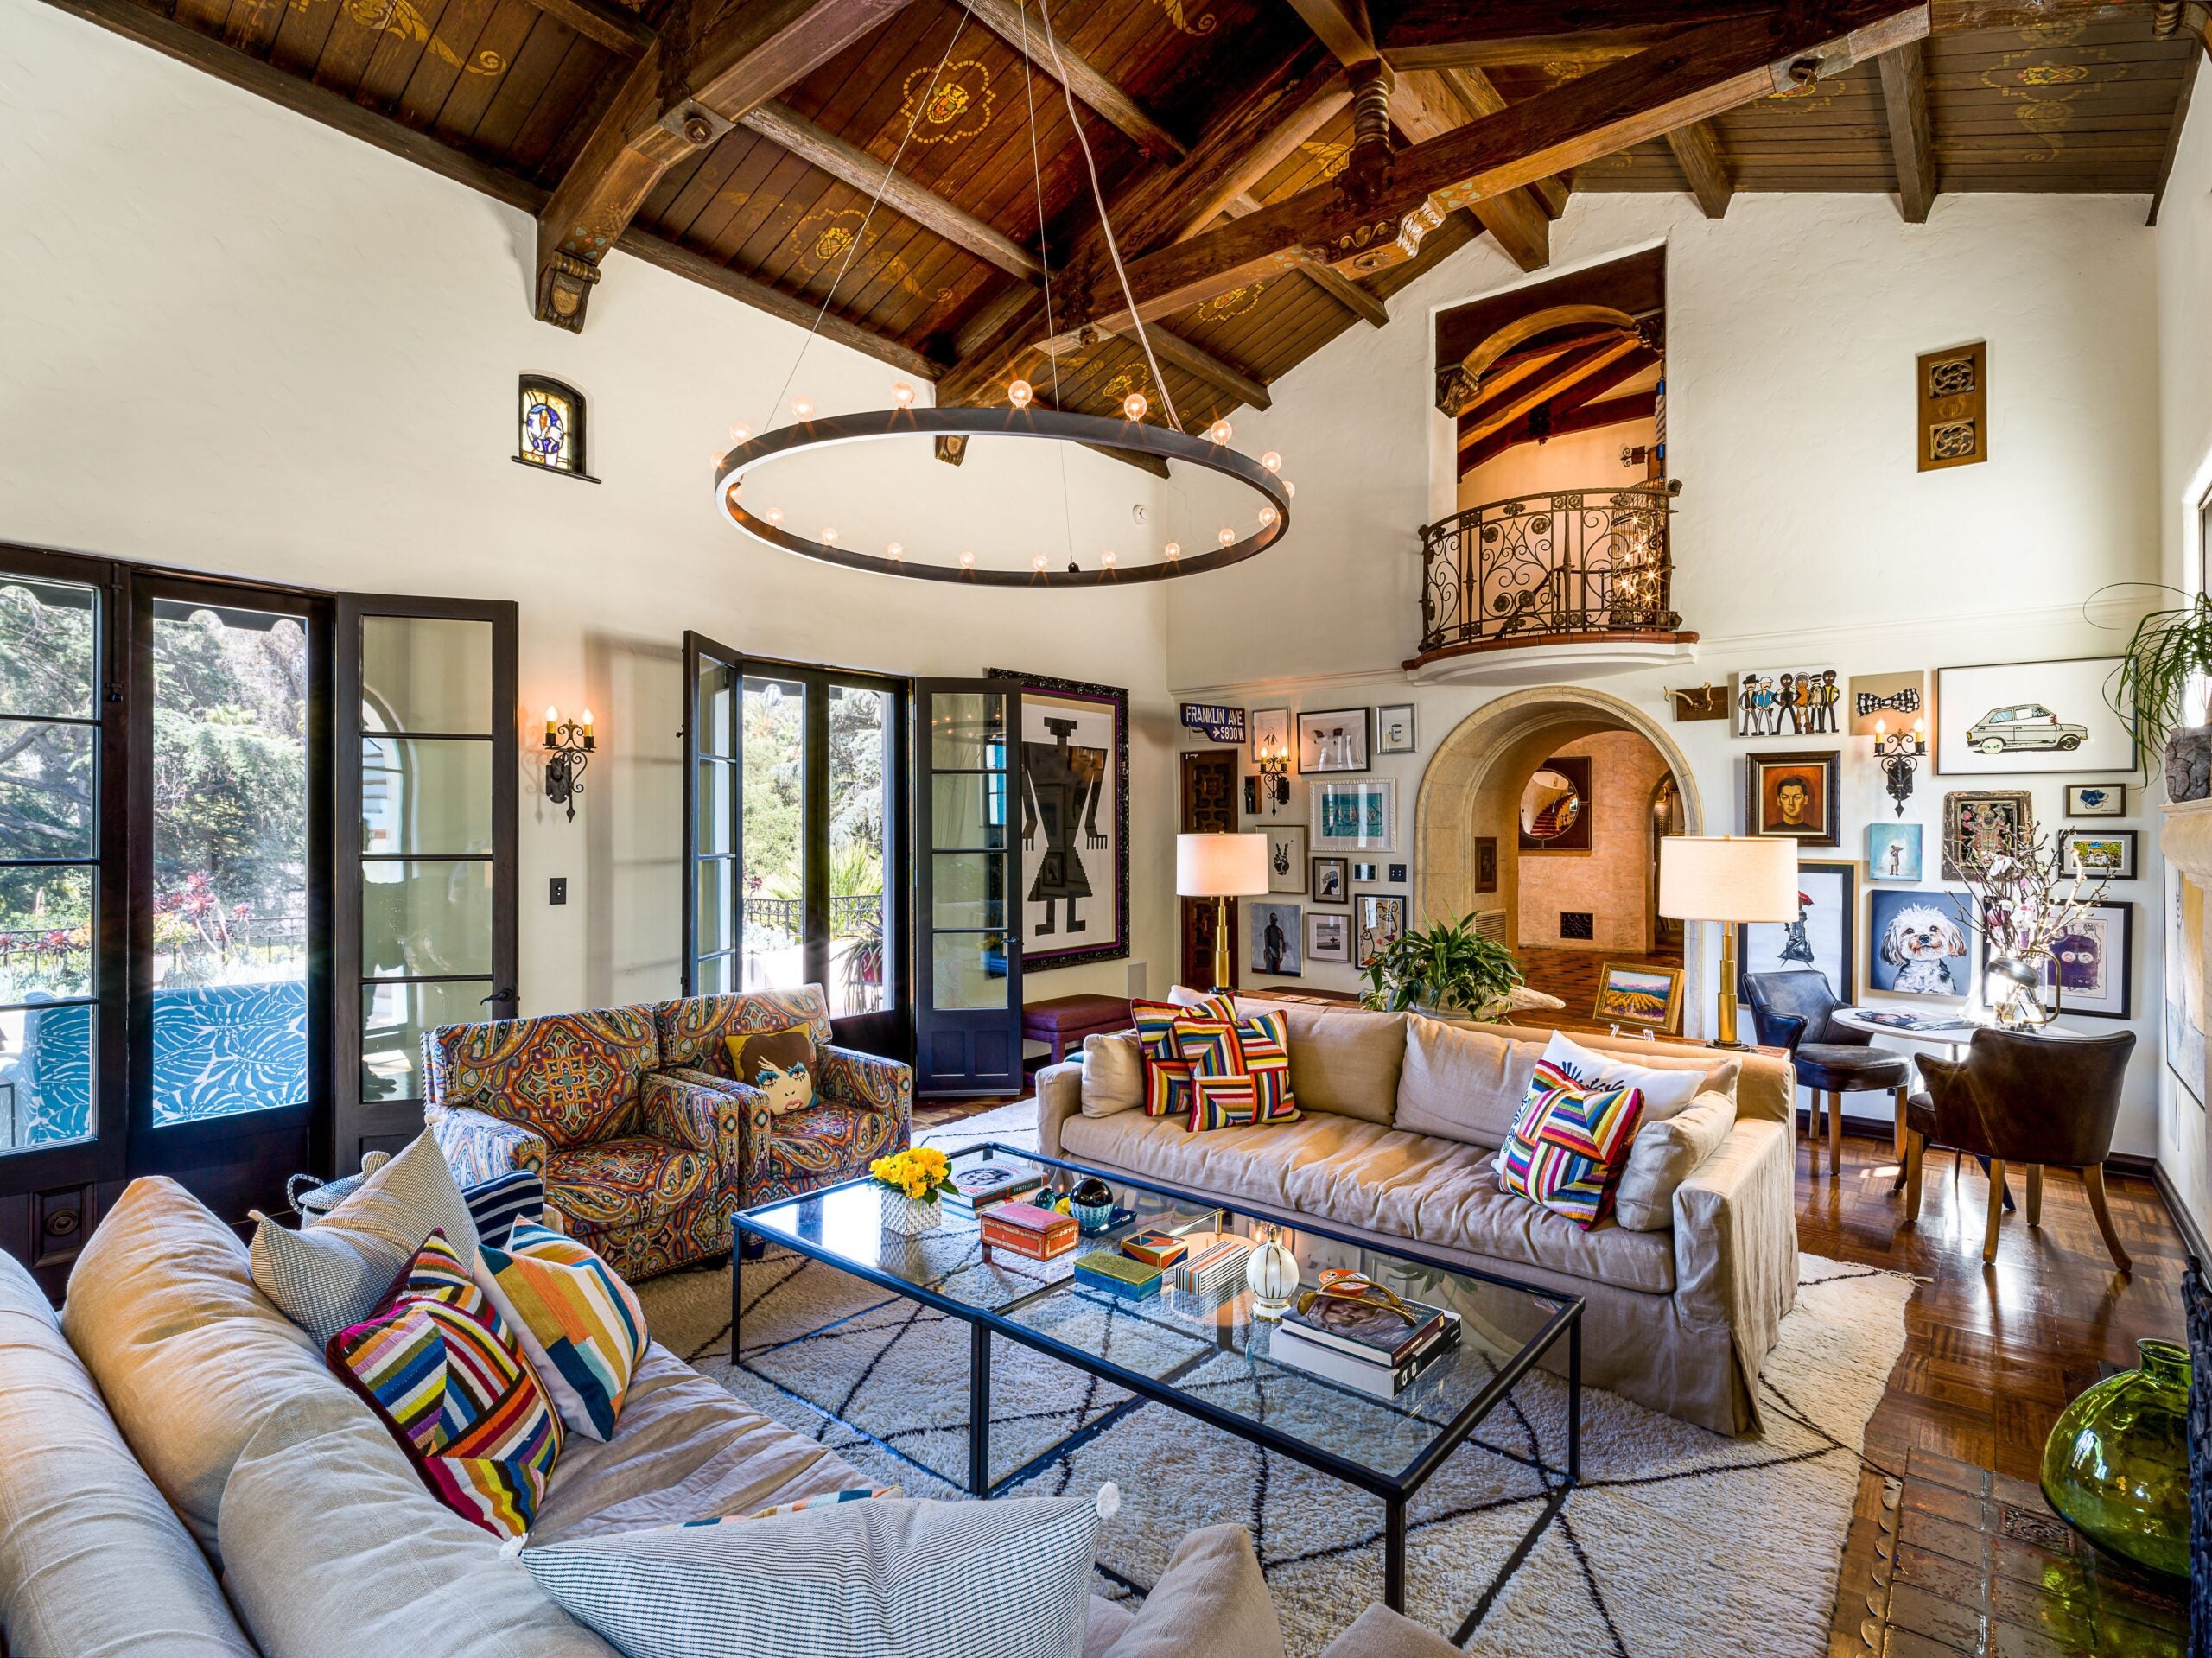 See inside the top celebrity homes on the market in 2021